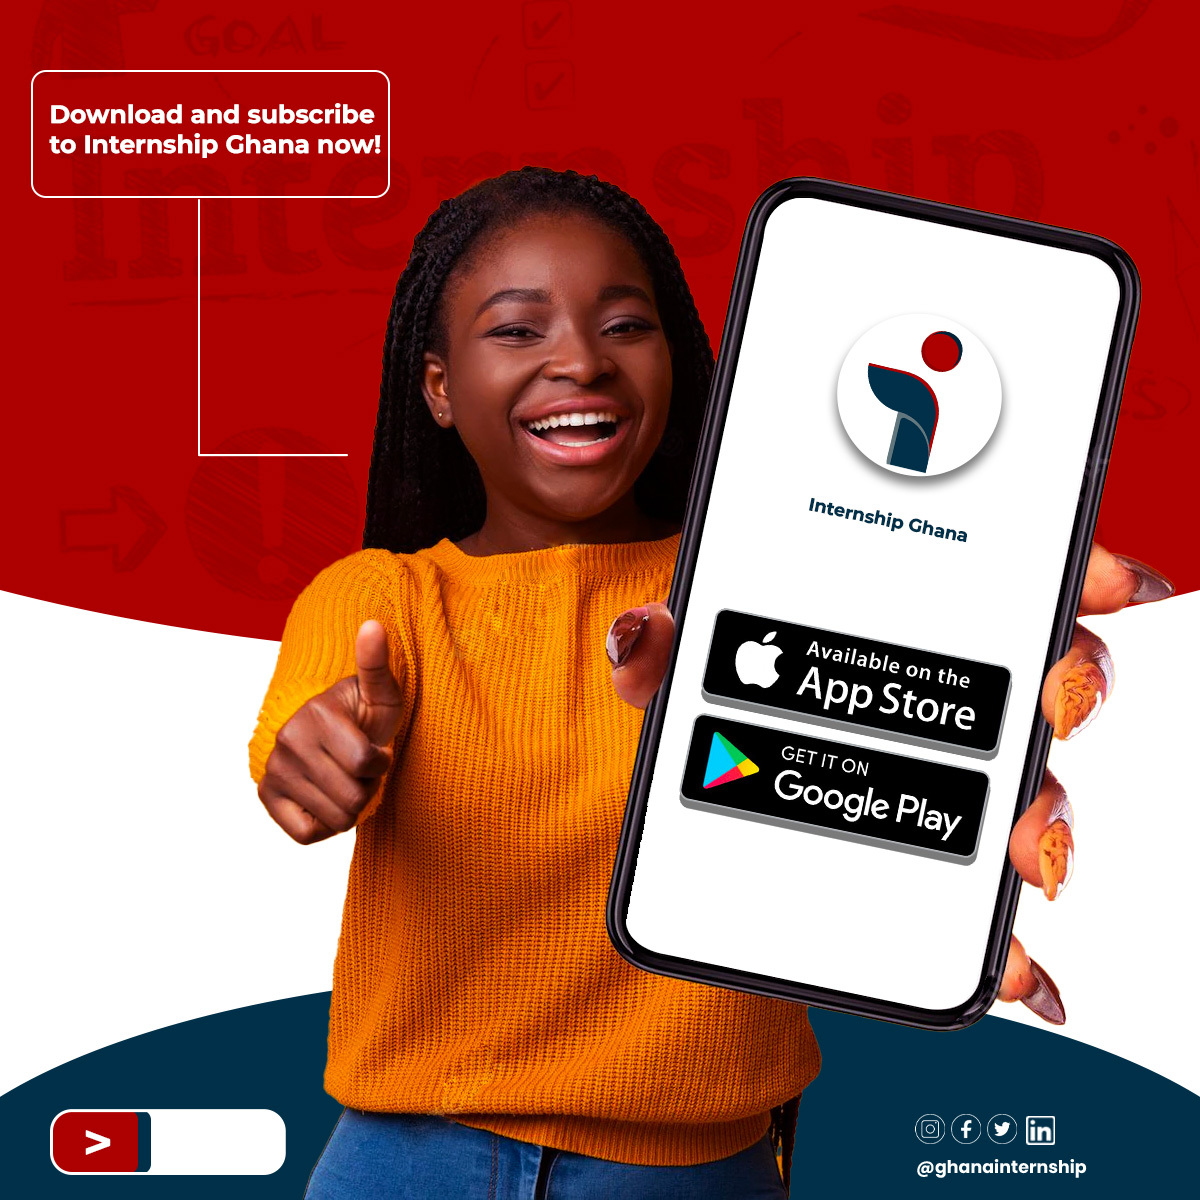 Are you looking for an internship opportunity? We’ve got you covered! Download the Internship Ghana app or visit internship.com.gh to register!